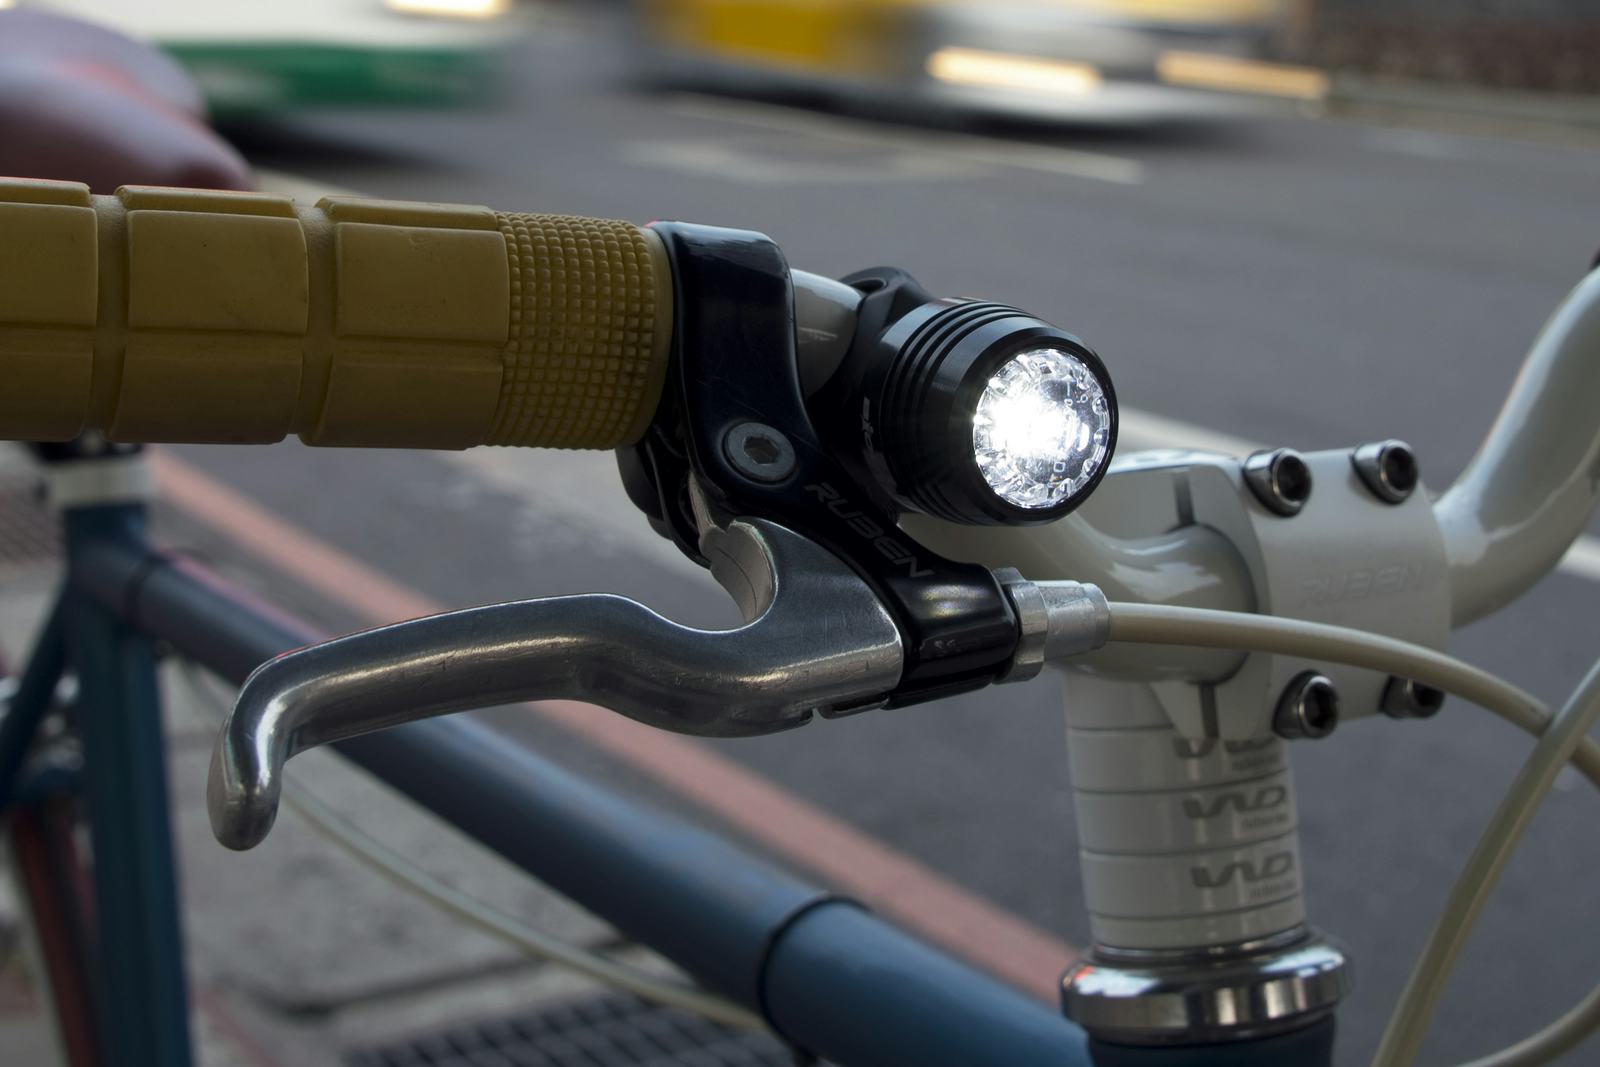 Revue lights offer 40 lumens front and 15 lumens rear. – Photo Biologic